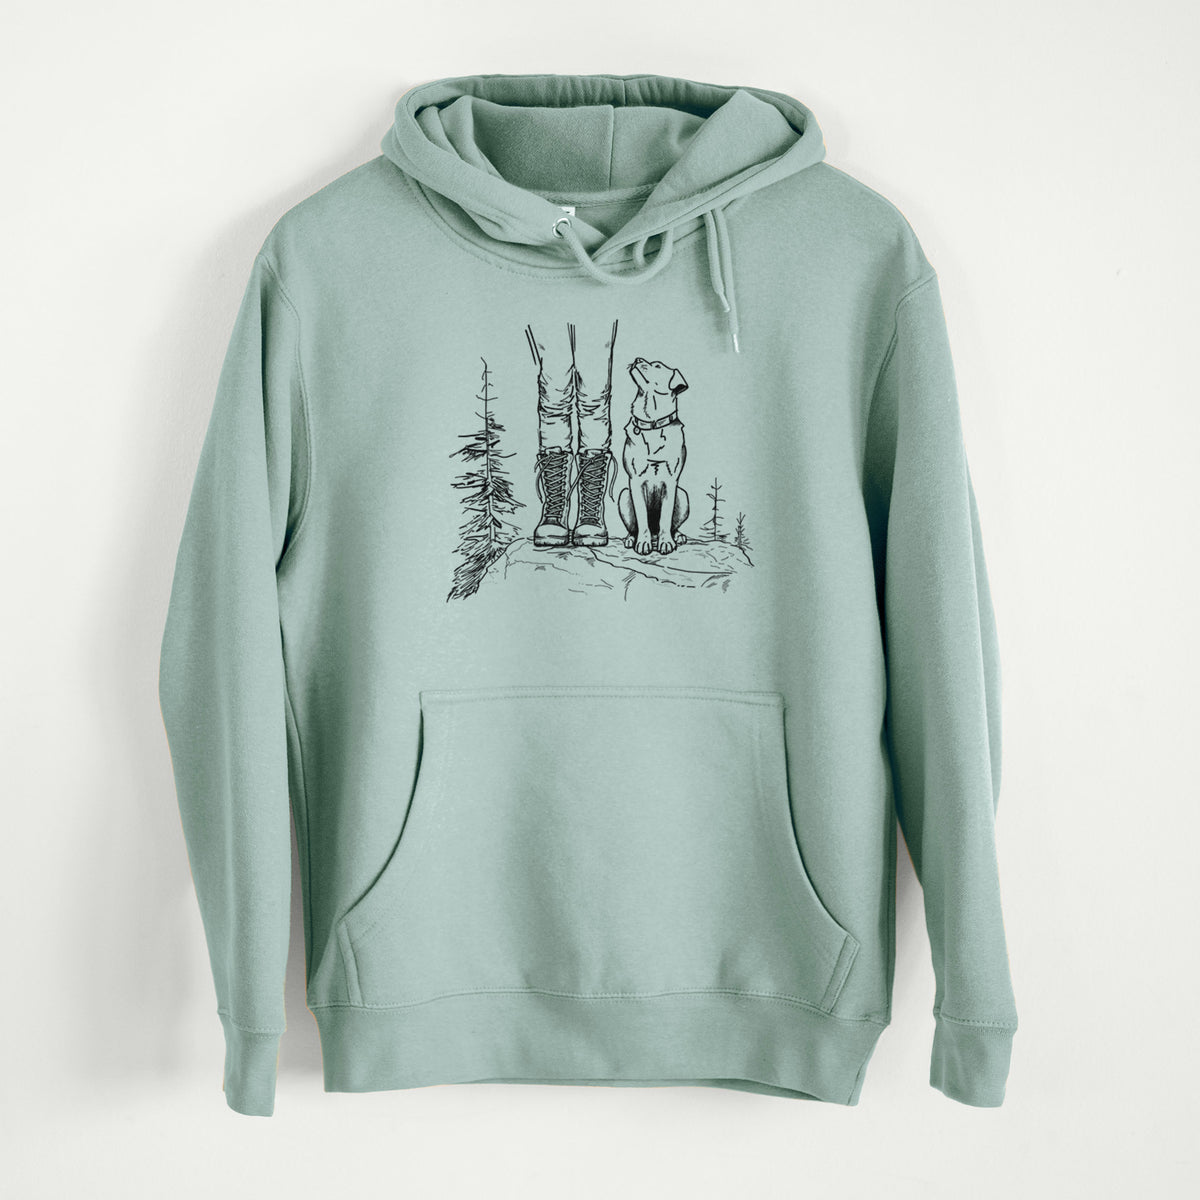 Trail Companions - Hiking with Dogs  - Mid-Weight Unisex Premium Blend Hoodie